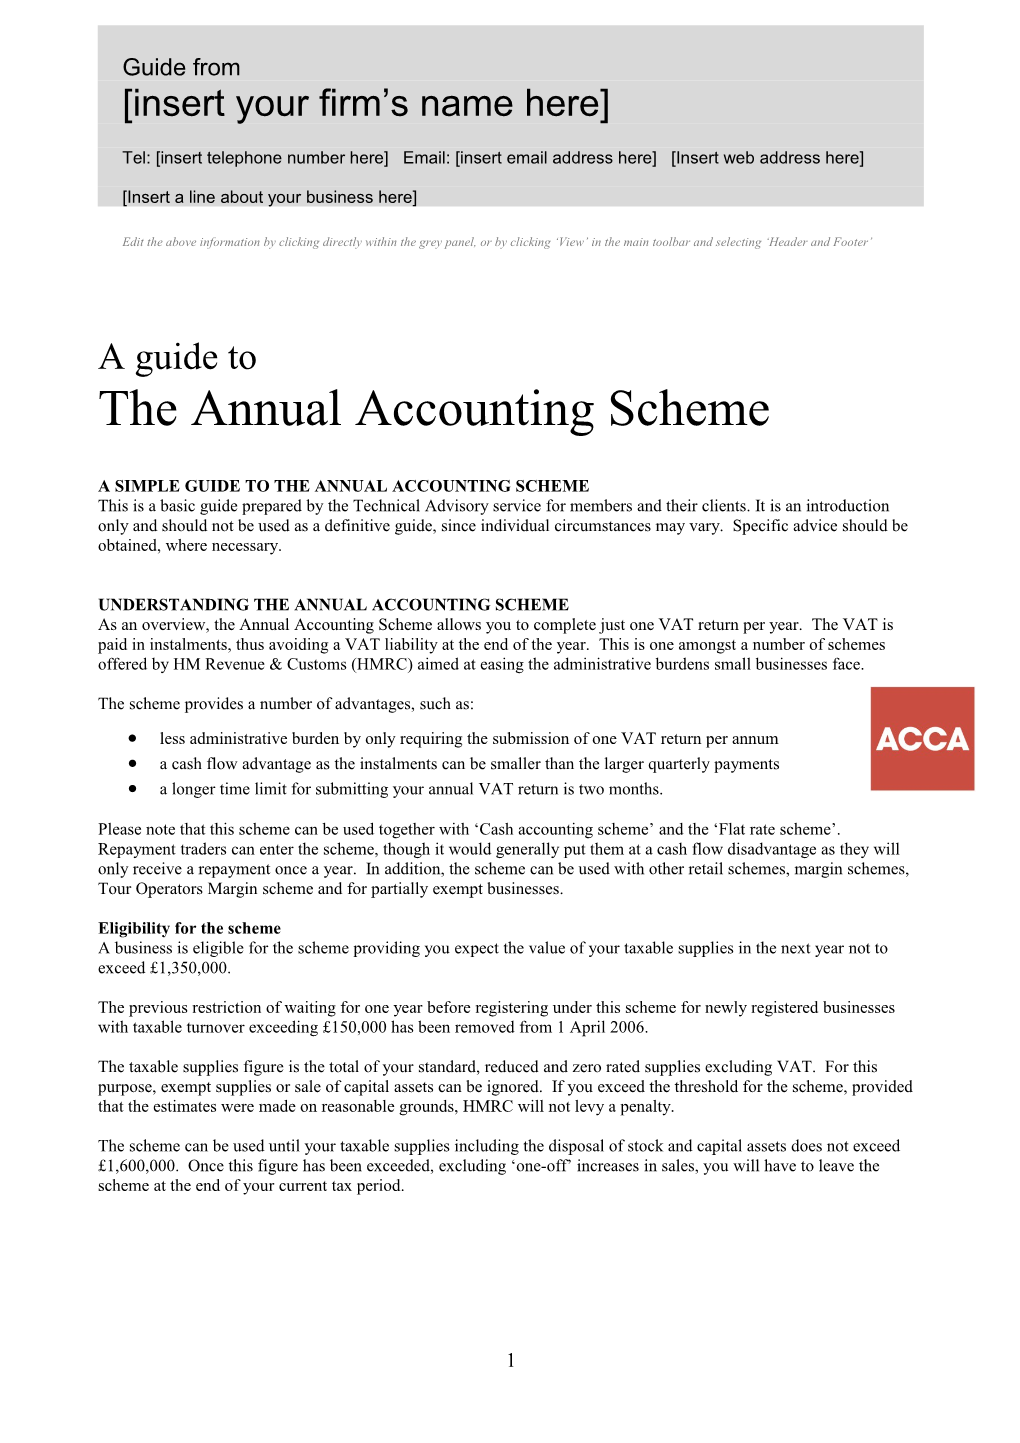 A Simple Guide to the Annual Accounting Scheme